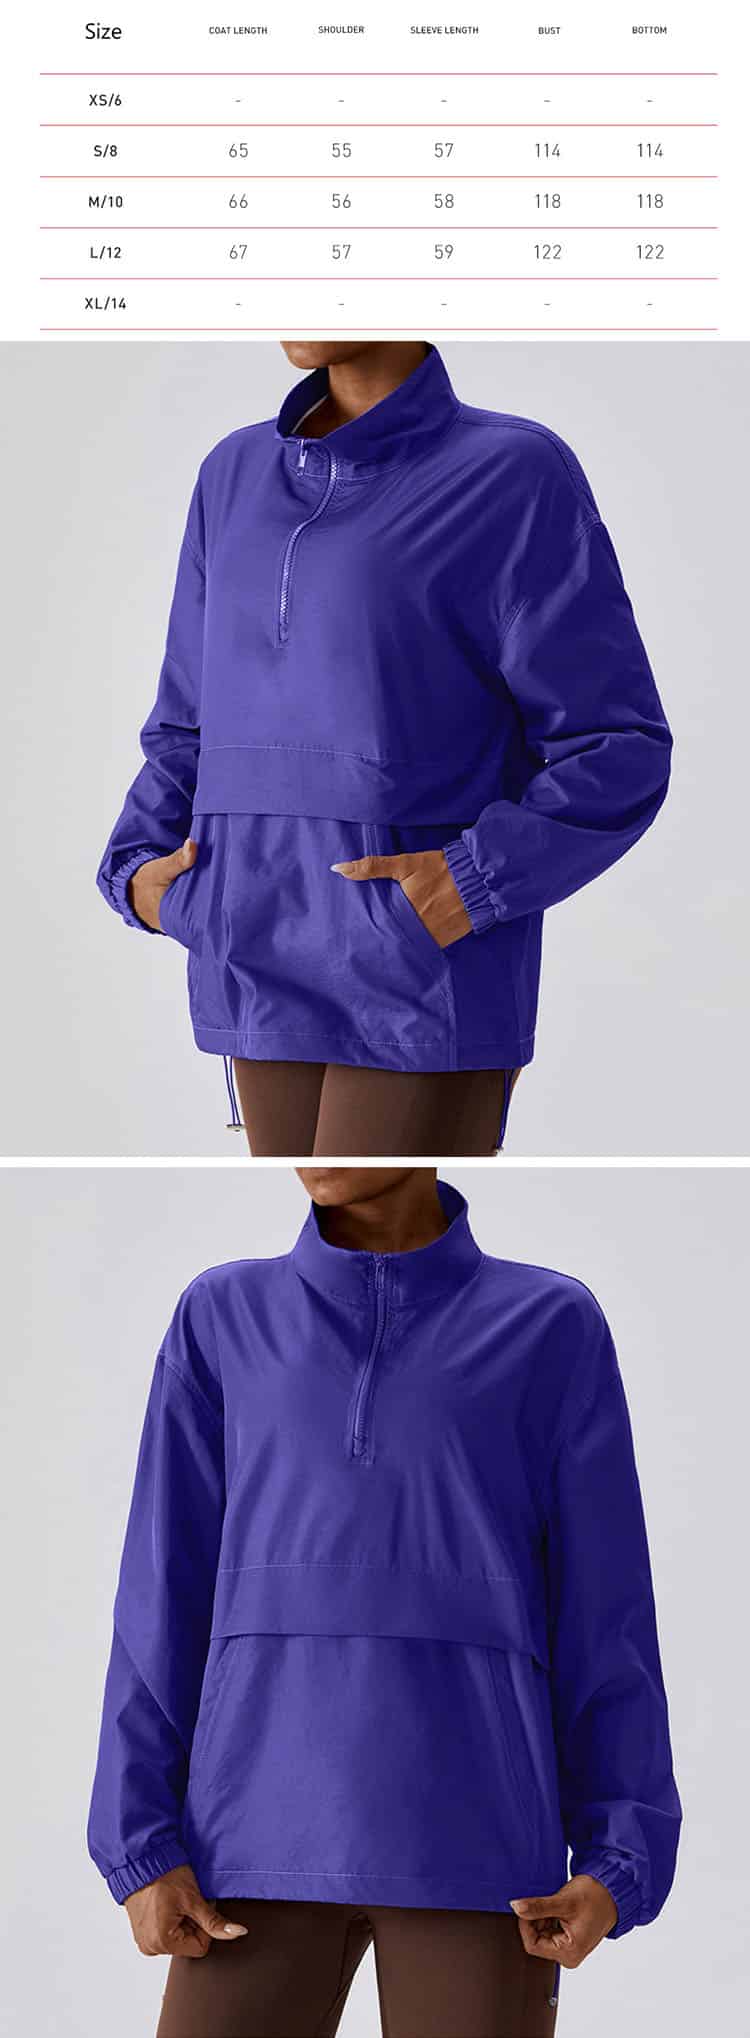 Our womens golf rain jacket is a must-have for any golfer, especially during the rainy season